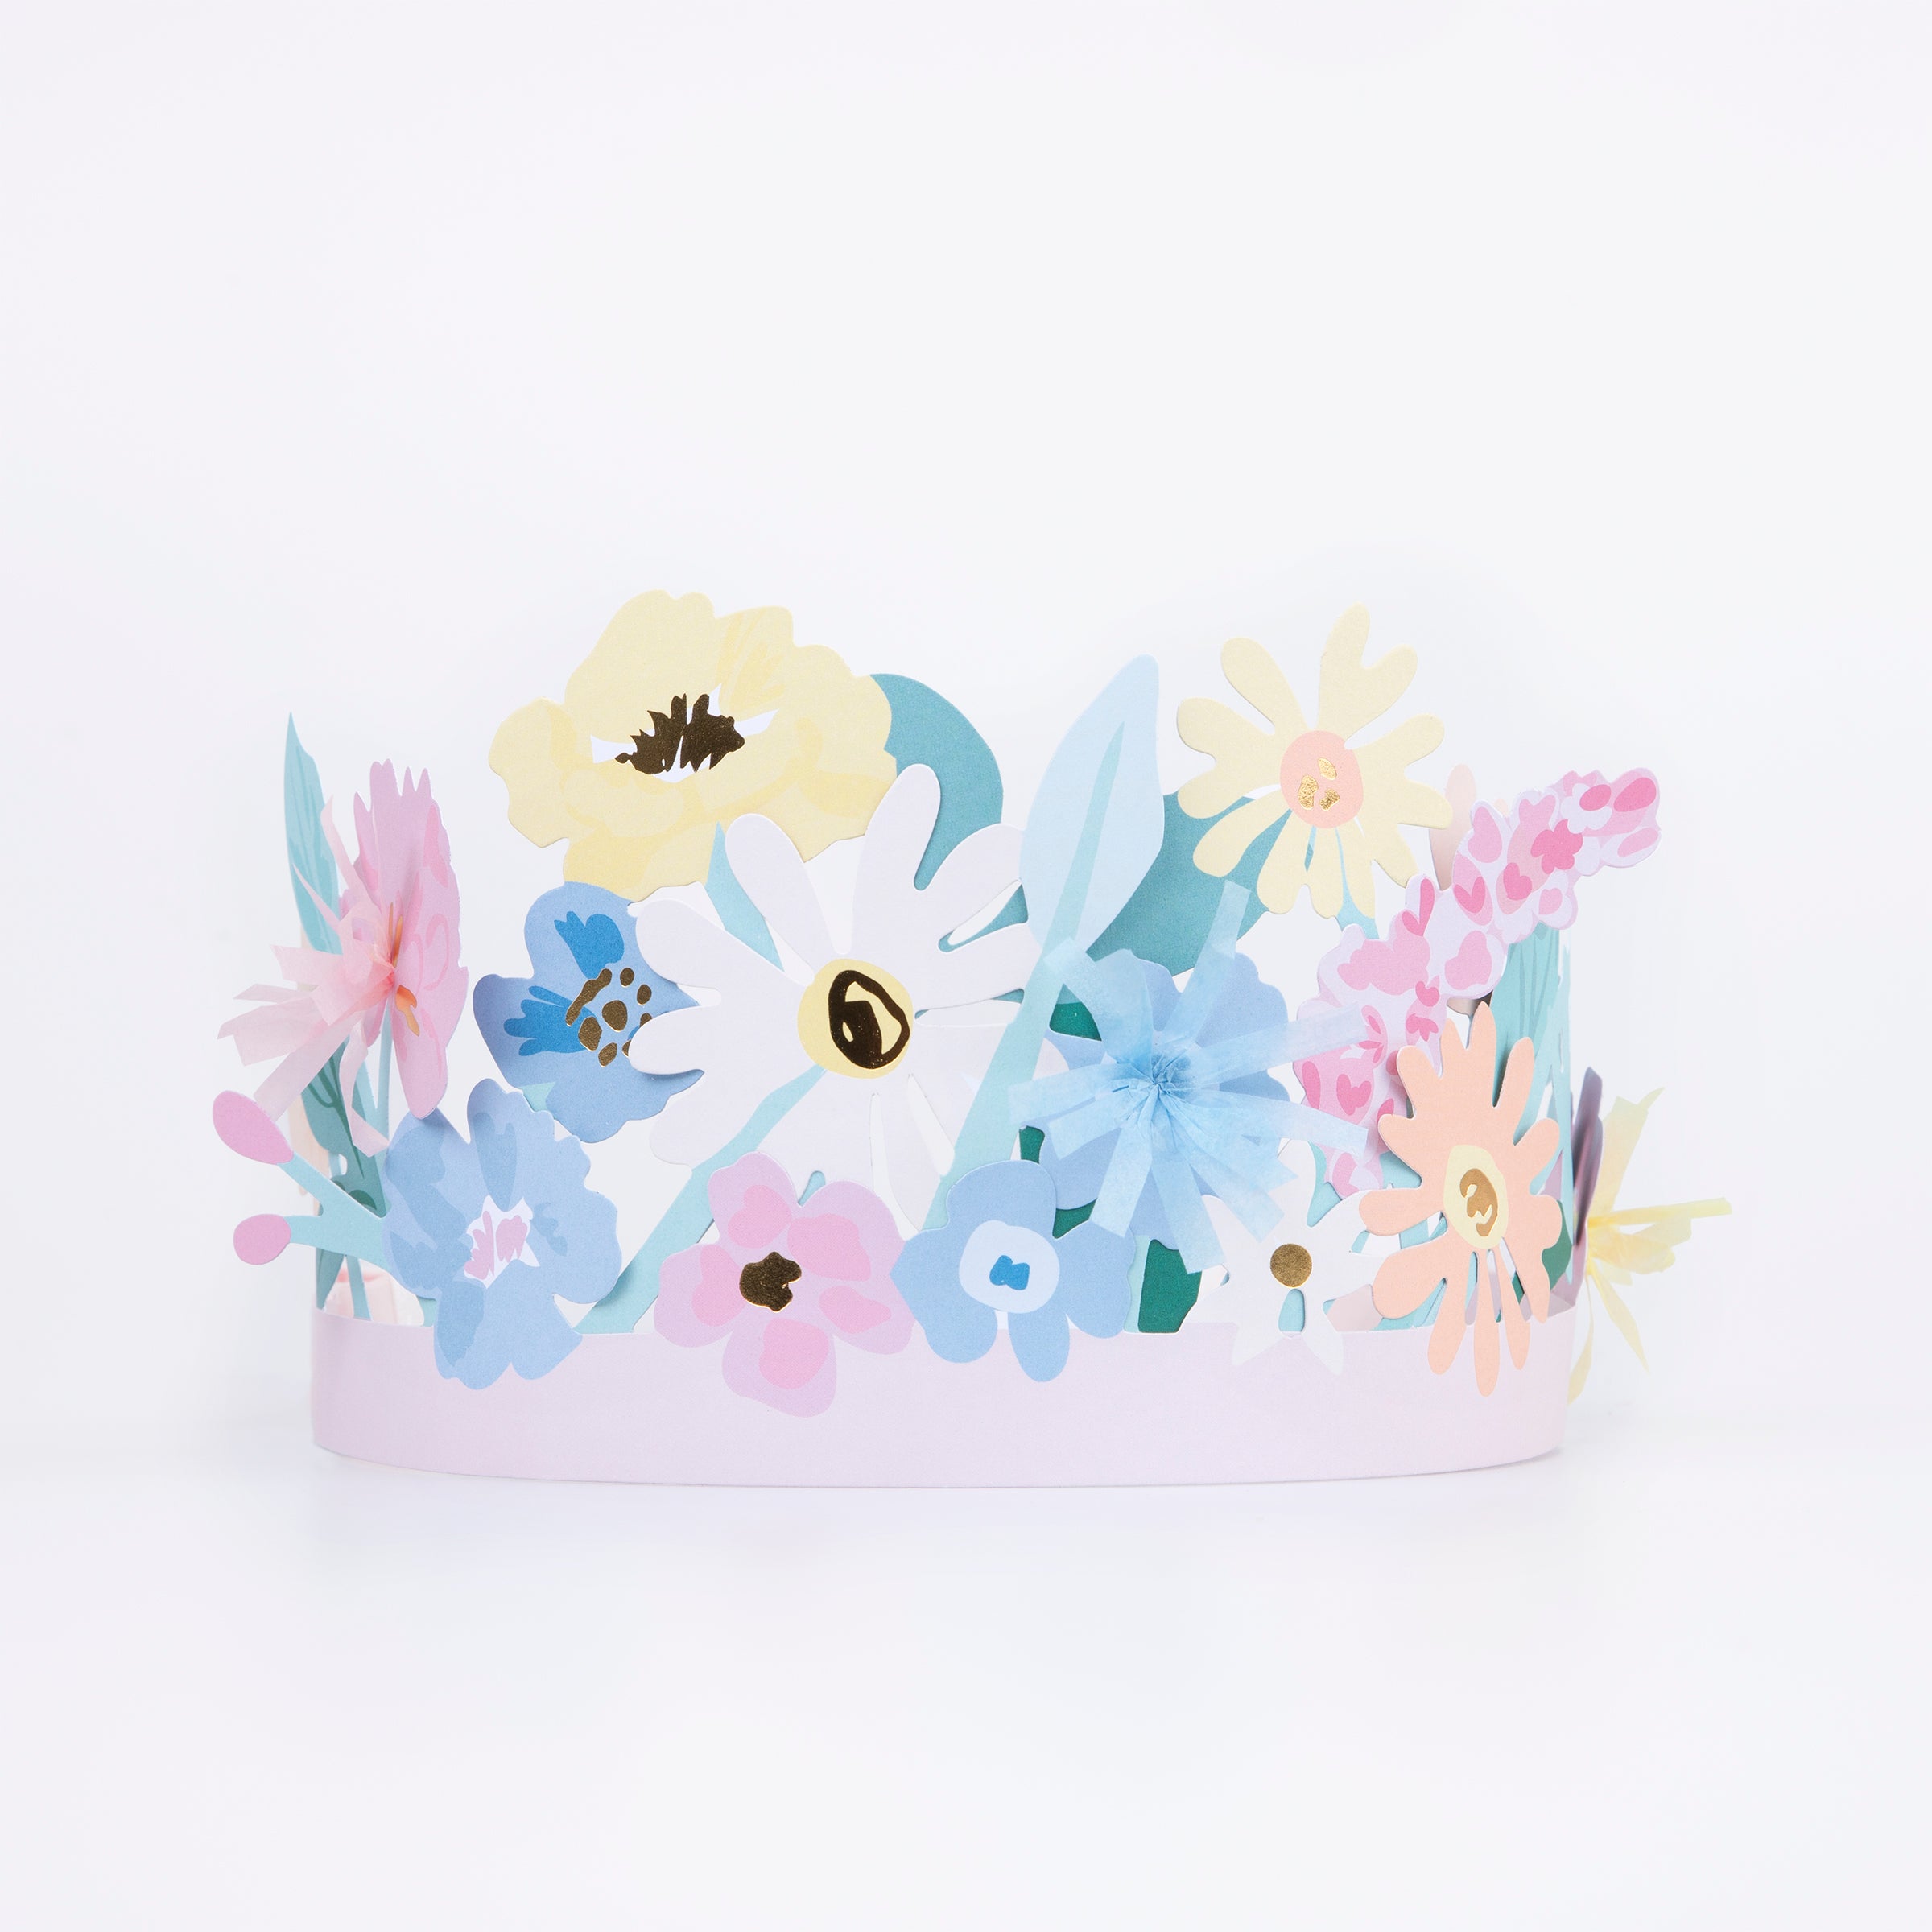 Our headdress, made with paper flowers, is the perfect Easter accessory.